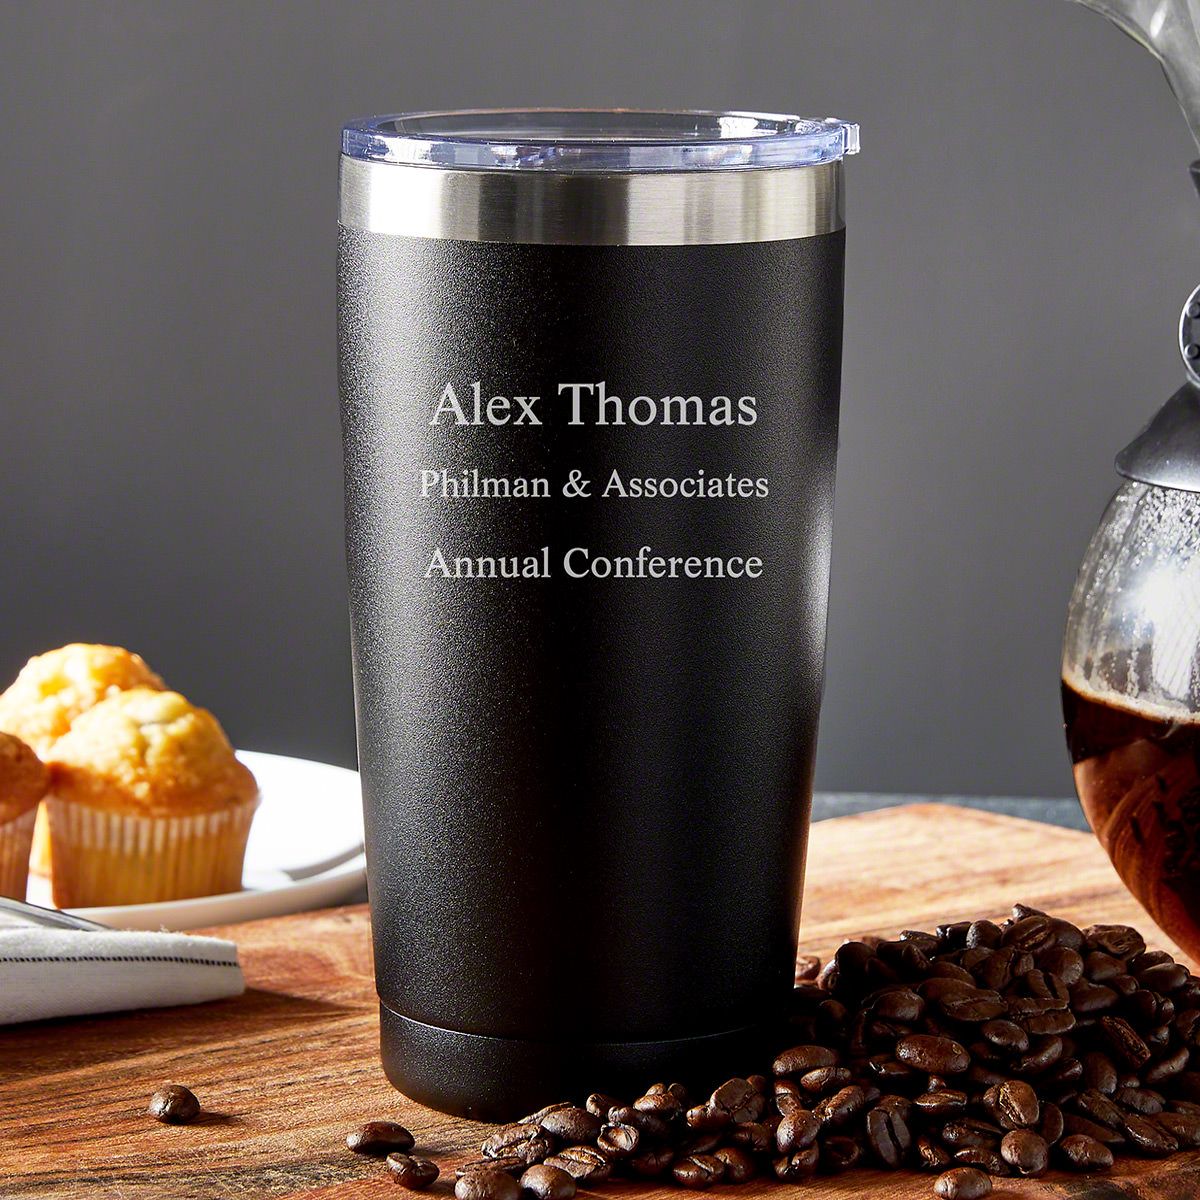 Personalized Gifts For Men - 20 Oz. Custom Tumblers w/Lid, Black -  Insulated Travel Coffee Mugs - Op…See more Personalized Gifts For Men - 20  Oz.